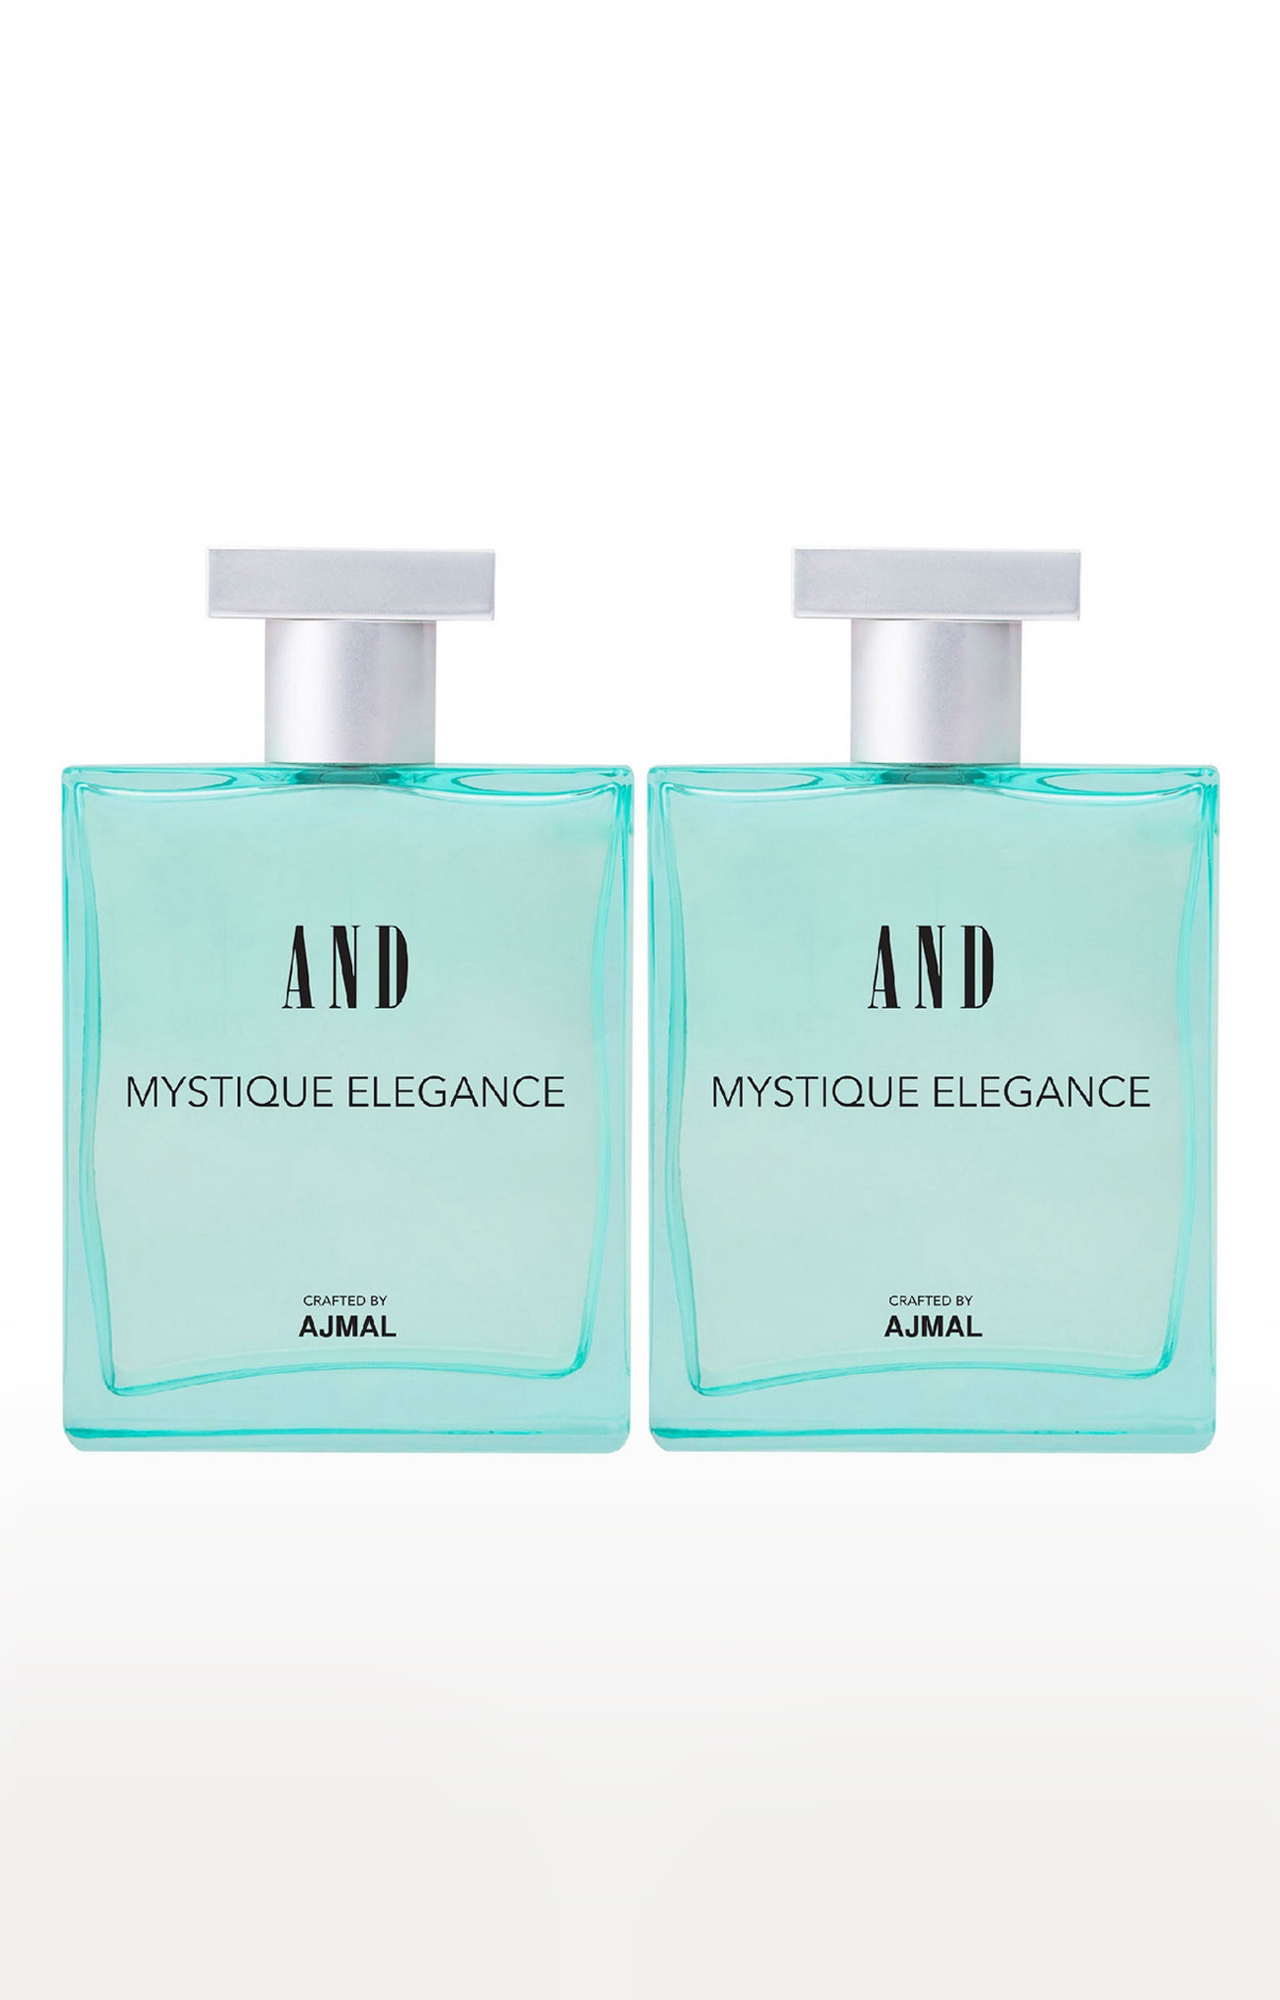 AND Mystique Elegance Pack of 2 Eau De Parfum 100ML each for Women Crafted by Ajmal 